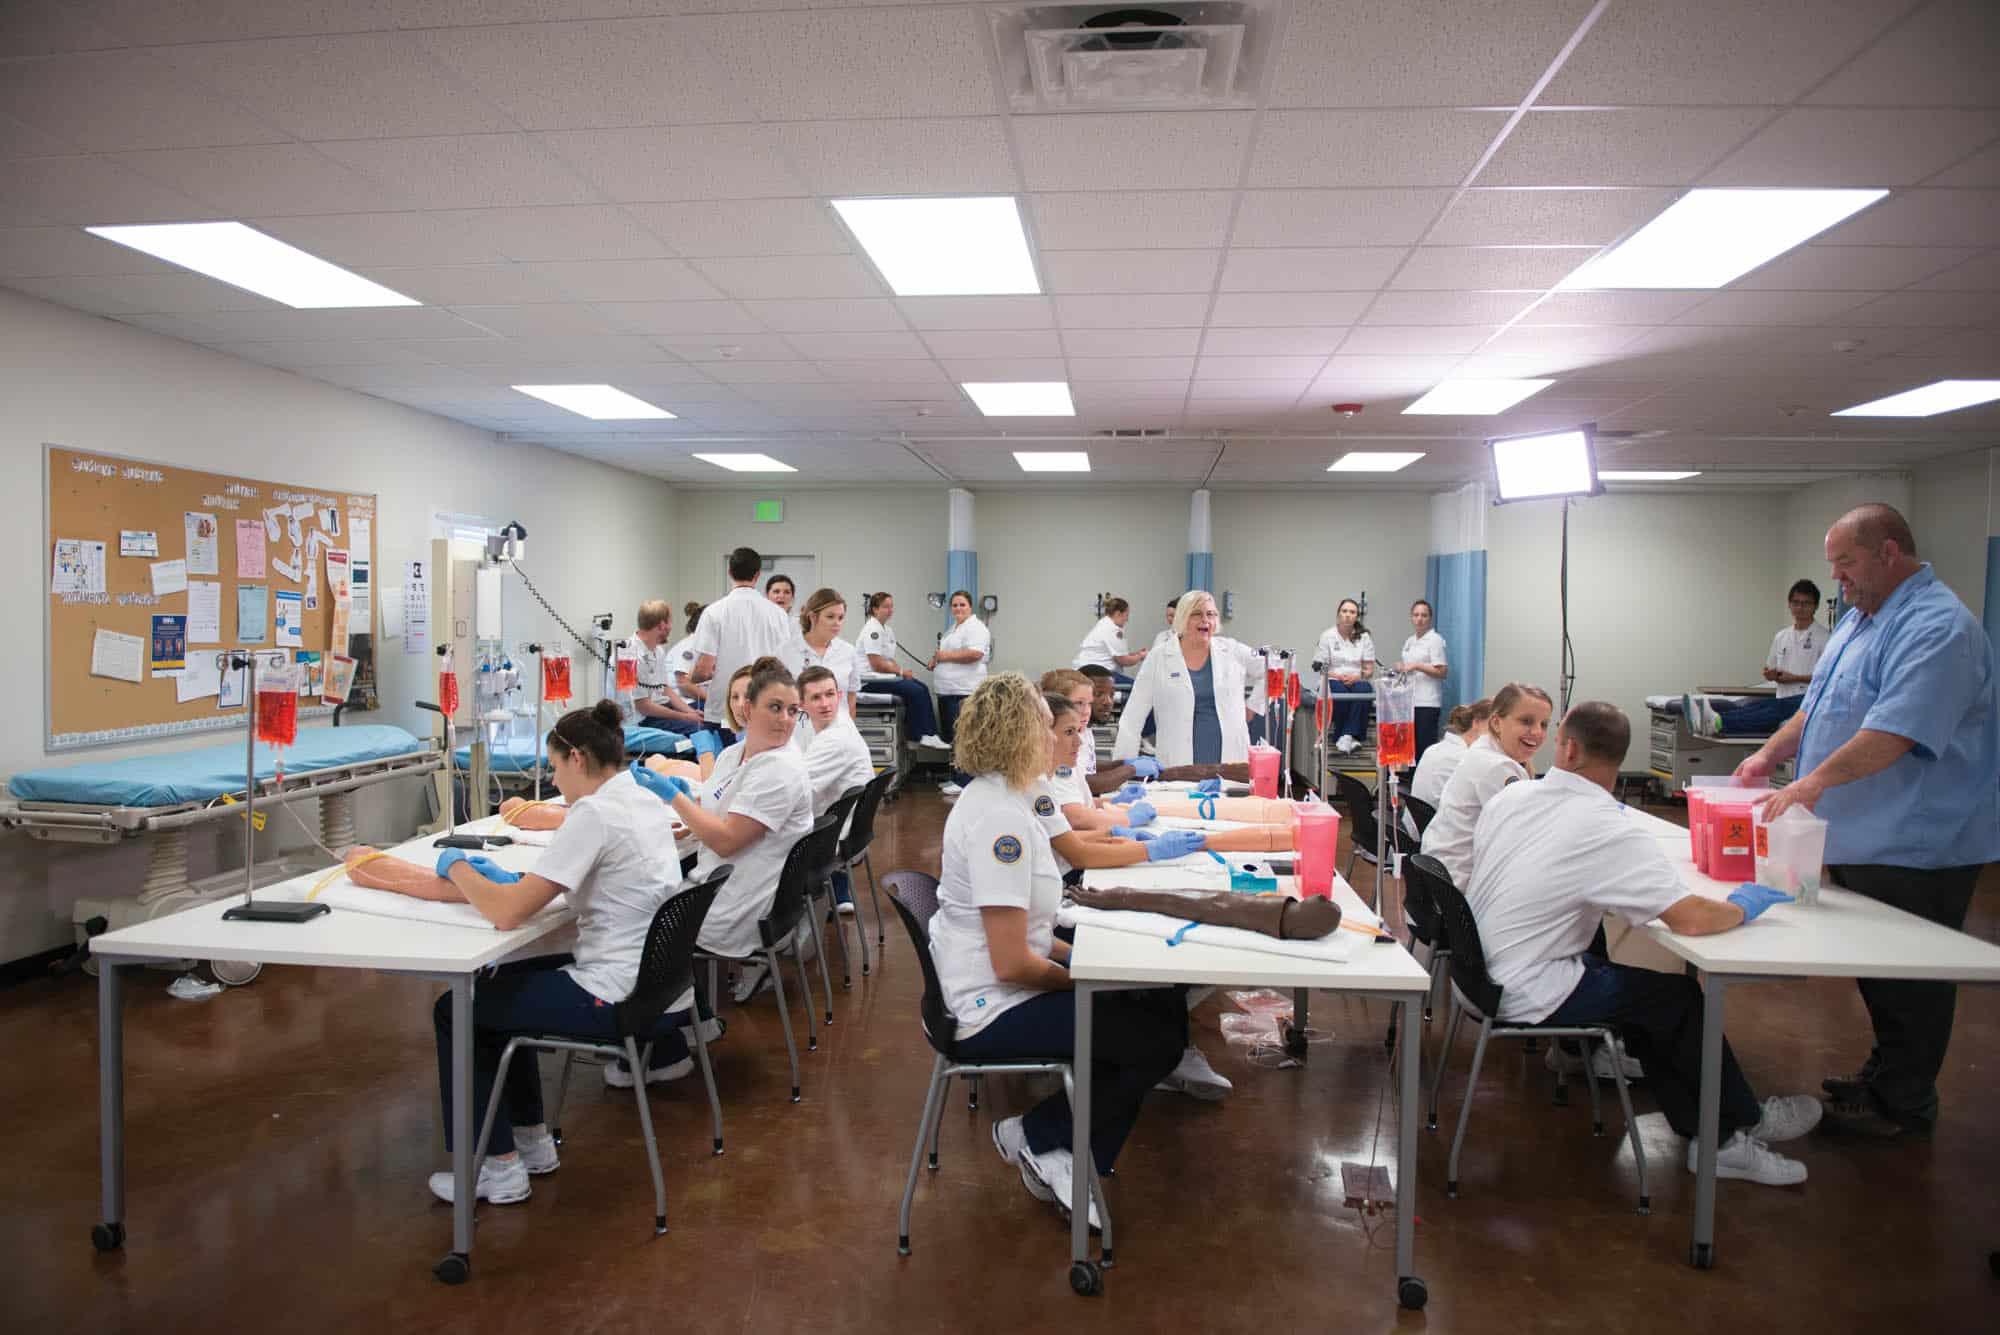 A group of nursing student in the classroom performing a procedure.